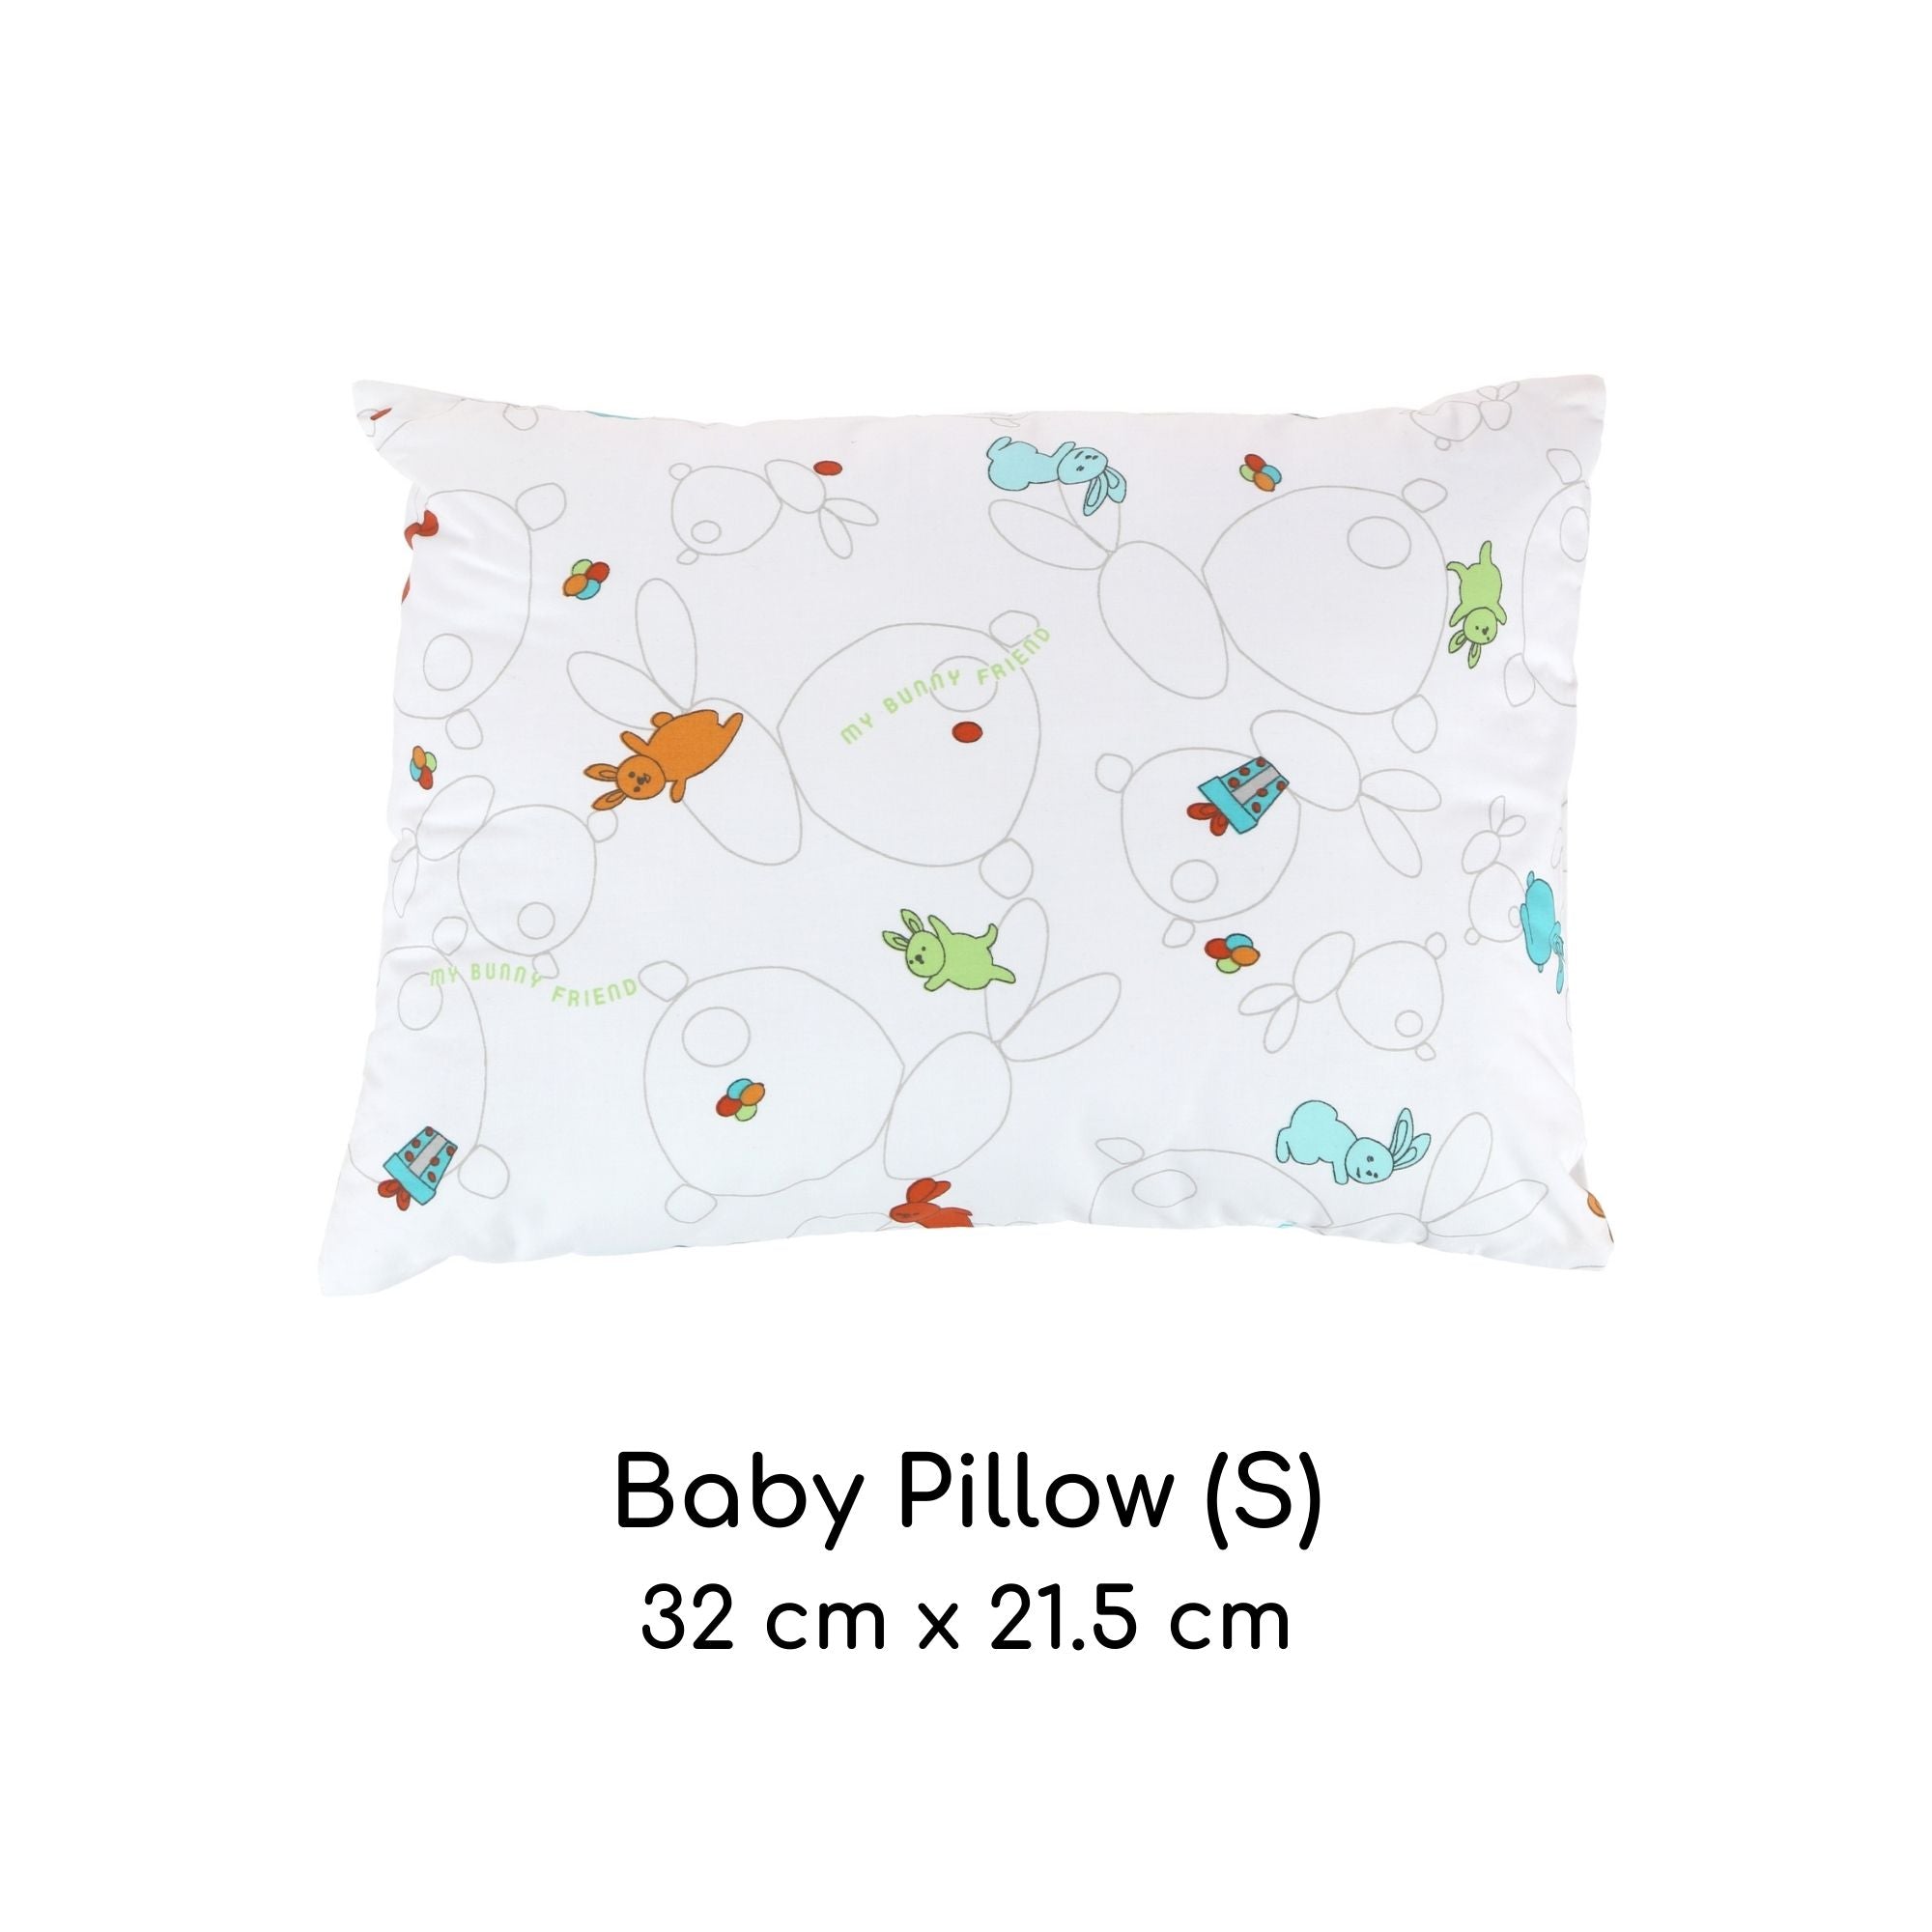 My Bunny Friend Baby Pillow - S (Bunny Party)